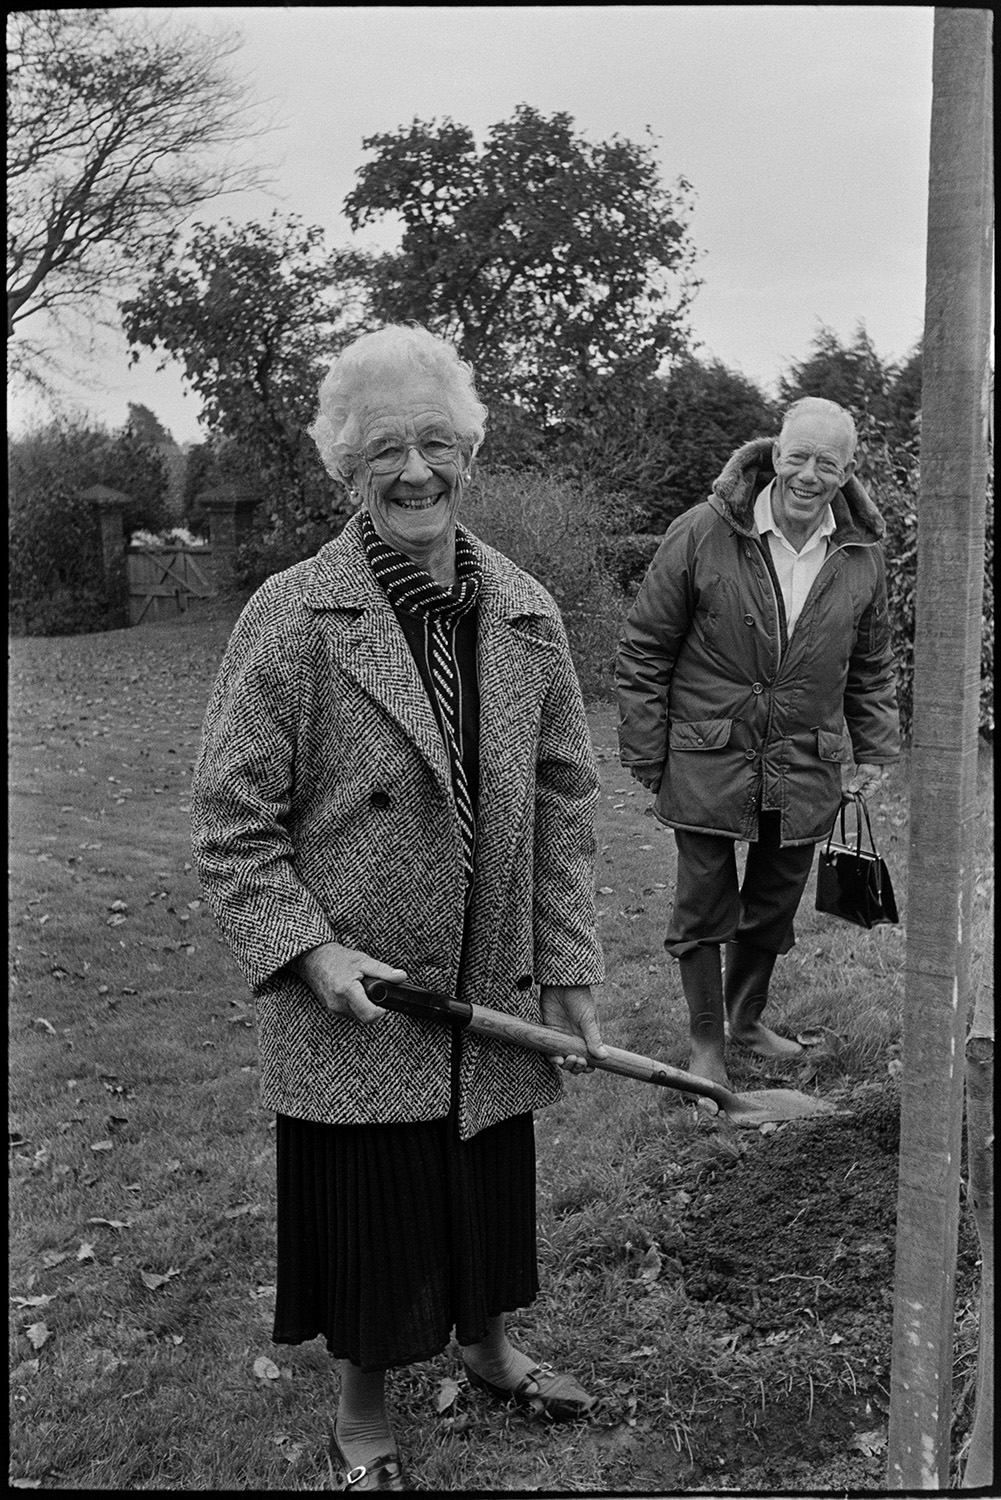 Tree planting at Arts Centre. 
[Mrs Branhan and Gareth Keen planting at tree at the Beaford Centre at Greenwarren House in Beaford. Gareth is holding the woman's handbag while she shovels earth around the tree.]